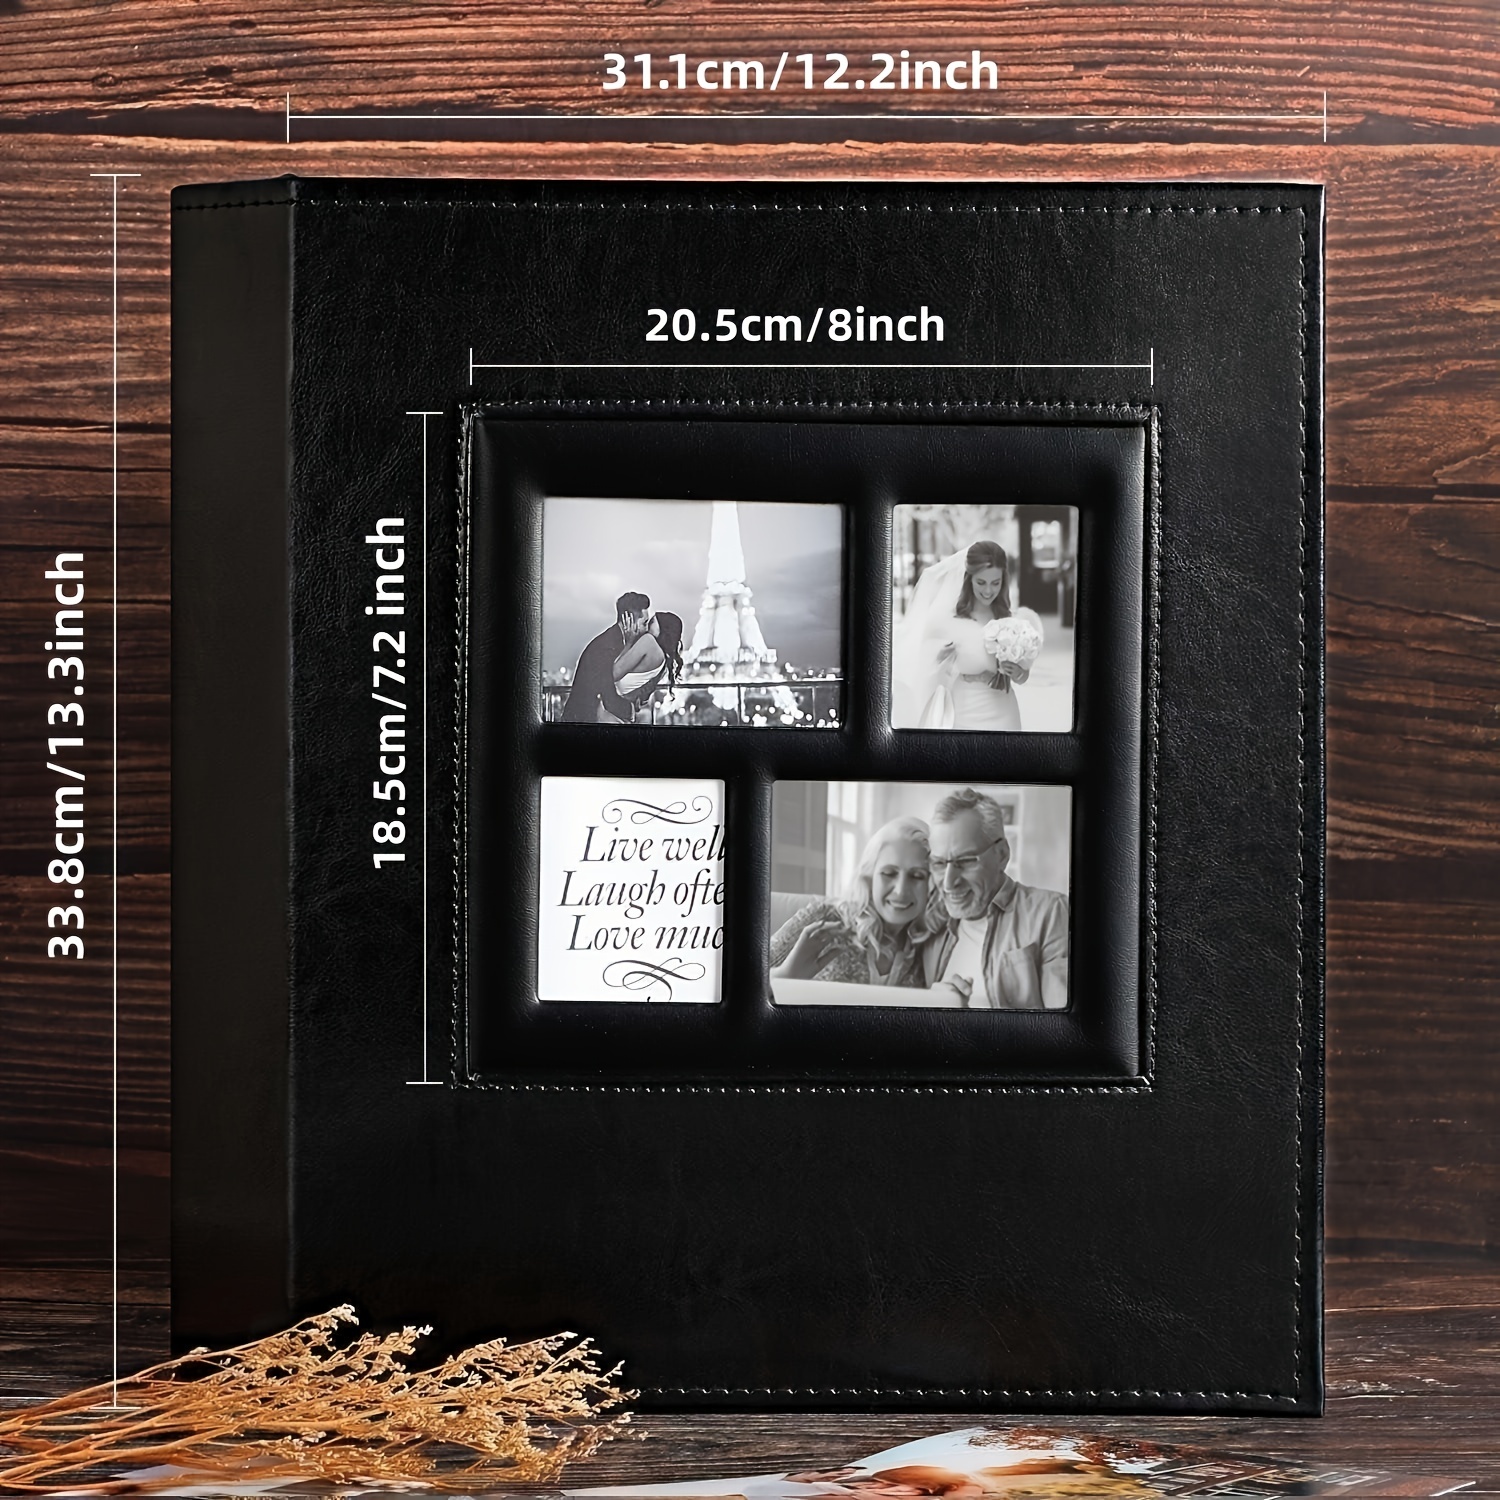 Hongxing Photo Album 4x6 1000 Pockets Photos, Extra Large Capacity Family Wedding Picture Albums Holds 1000 Horizontal and Vertical Photos